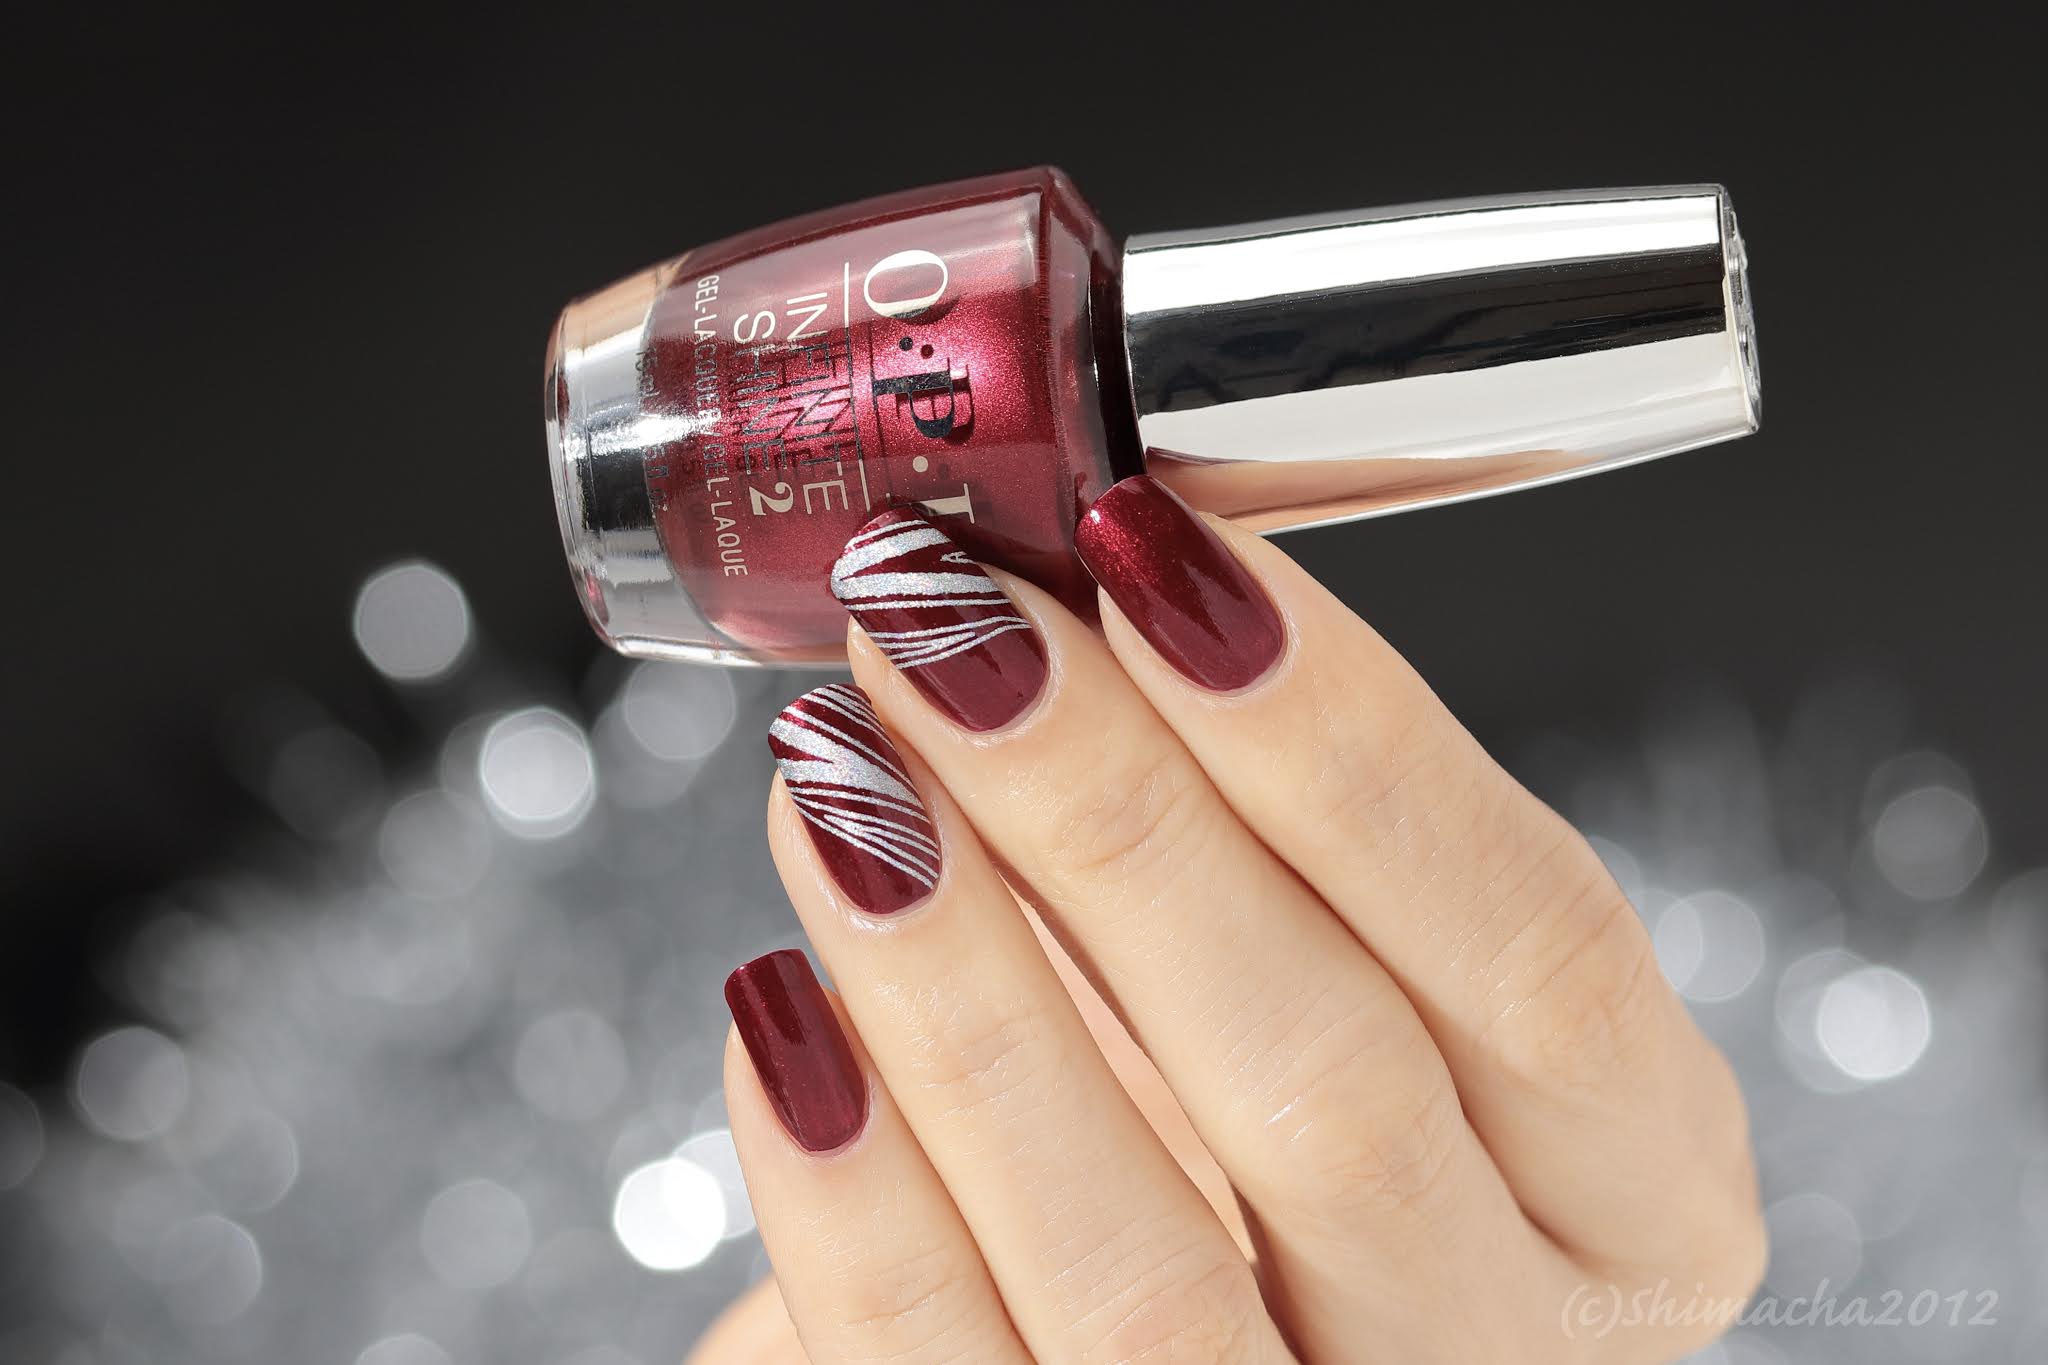 7. OPI "I'm Not Really a Waitress" - wide 4